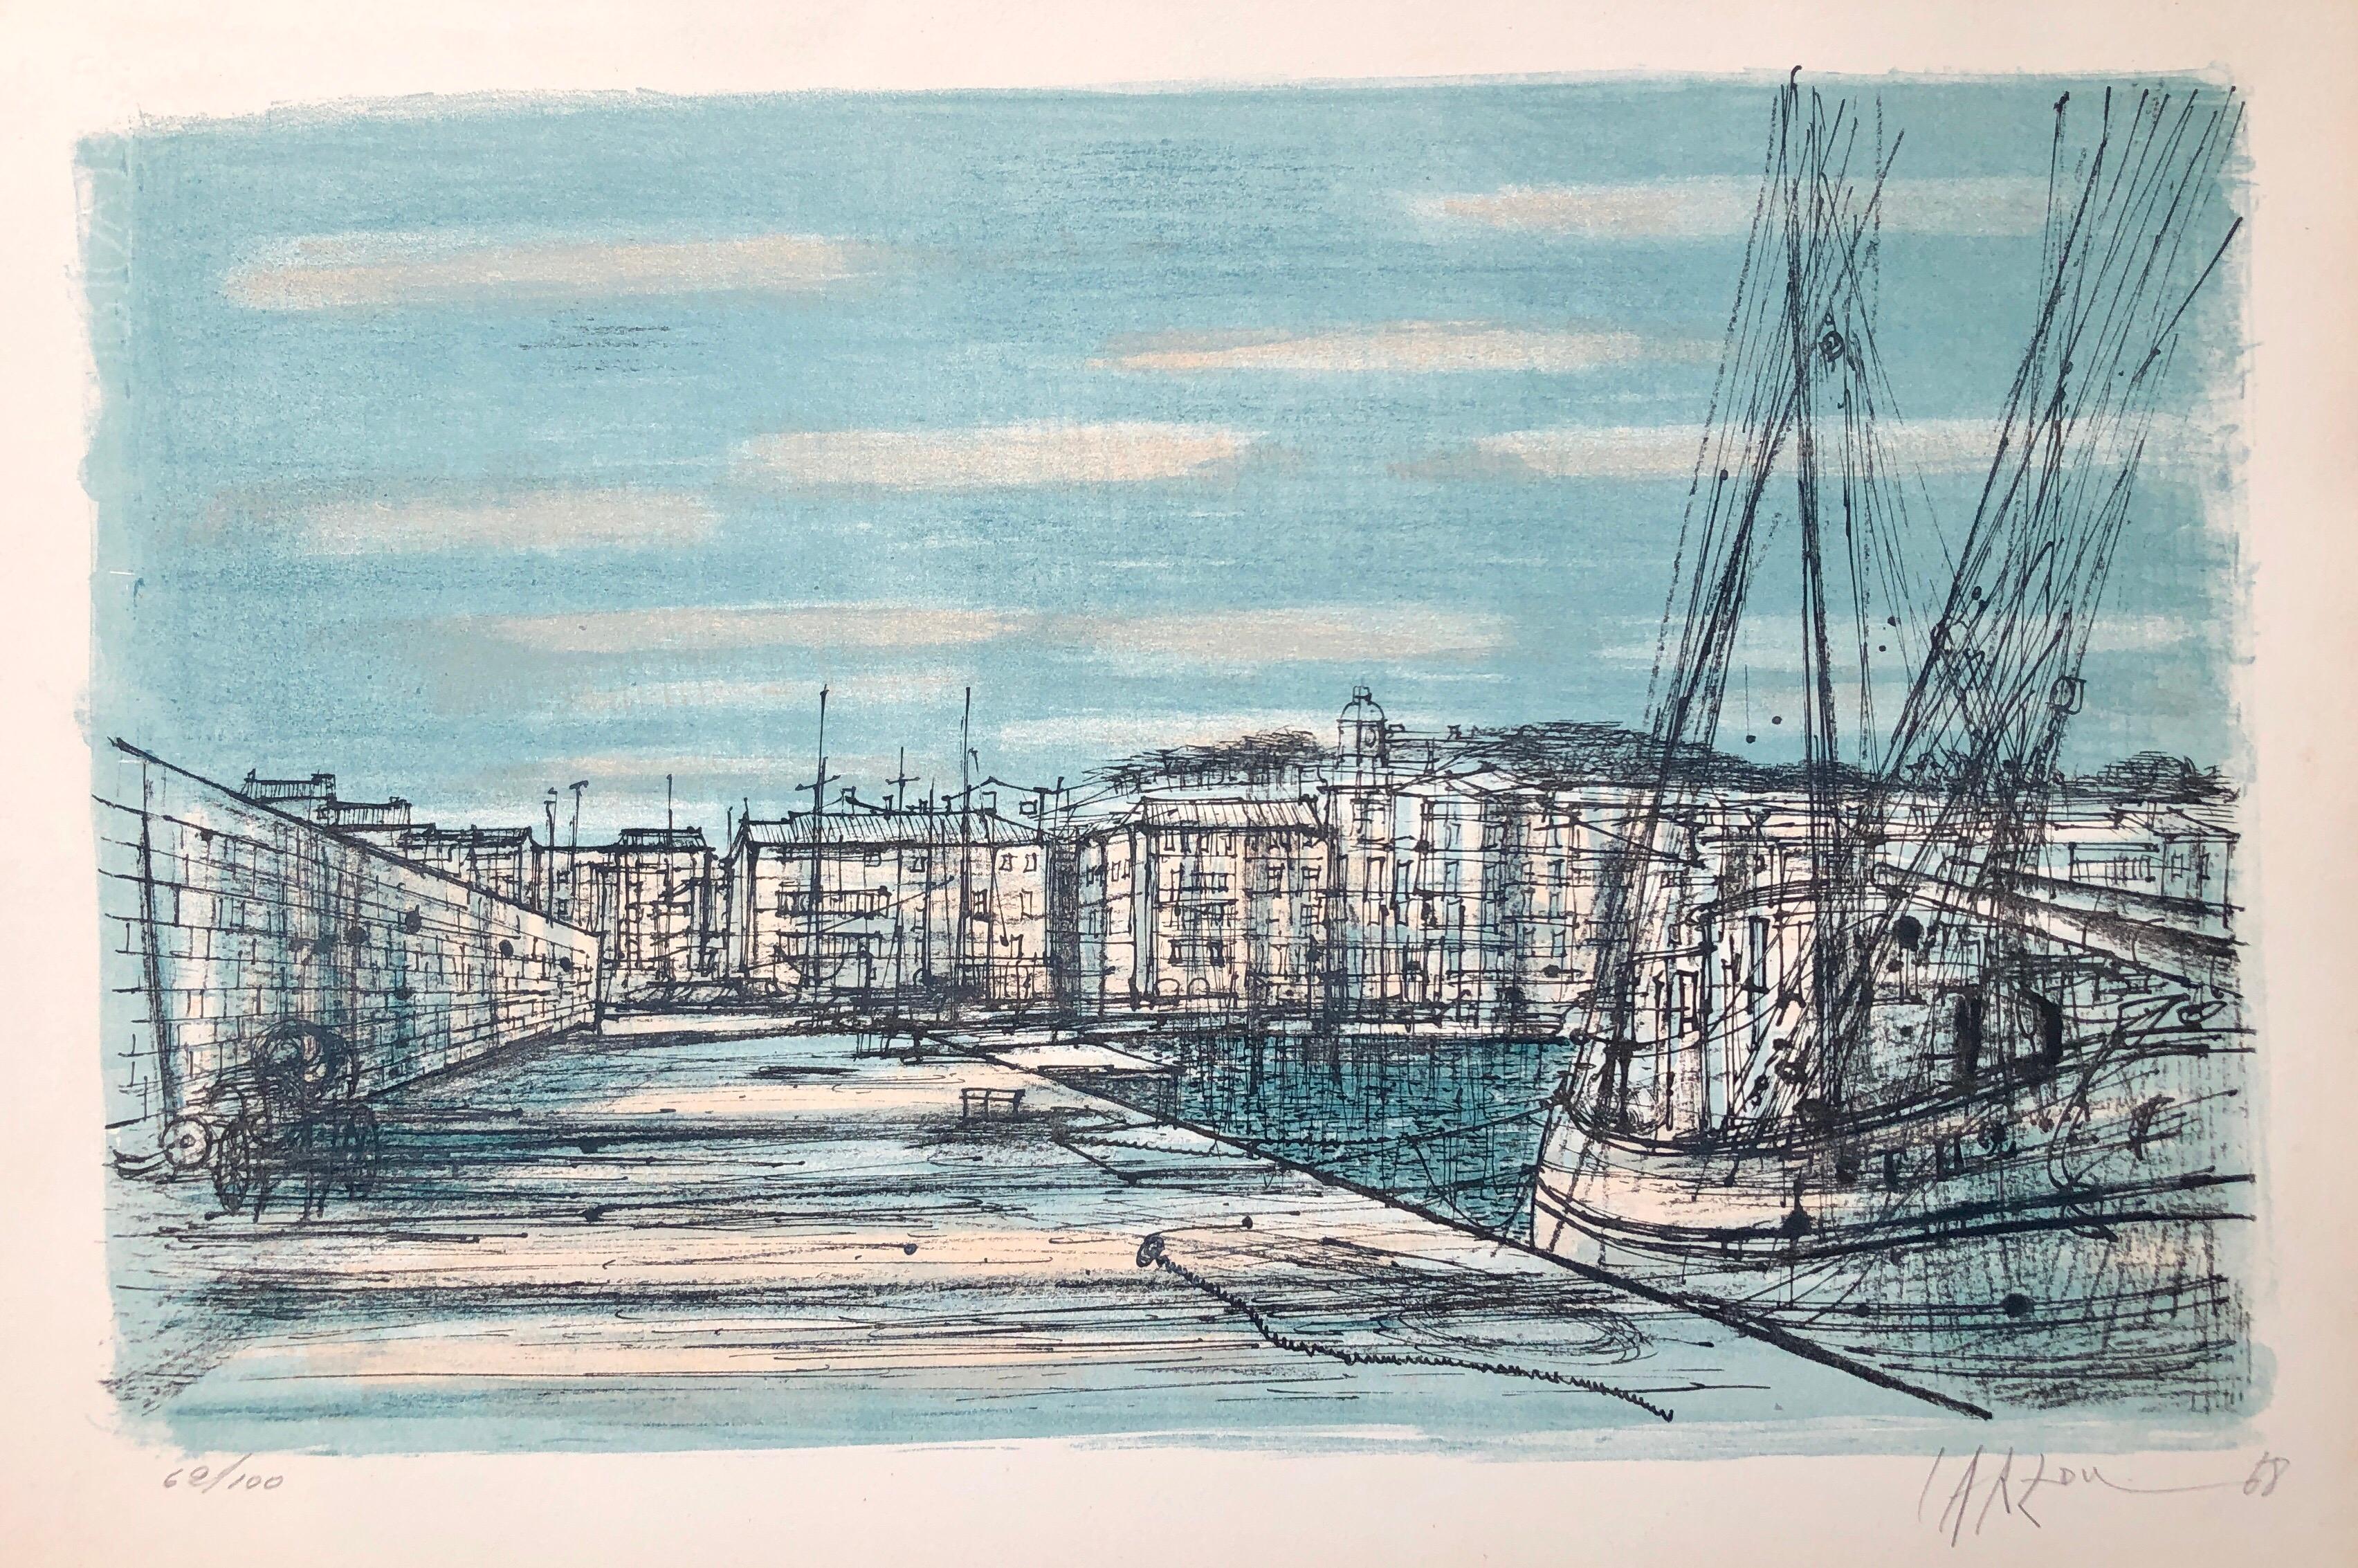 This is a hand signed in pencil, vintage, limited edition lithograph modern art print, printed in Switzerland on Rives French art paper in 1968. in shades of sea blue, black and green. It depicts the fames French Riviera resort town of St.